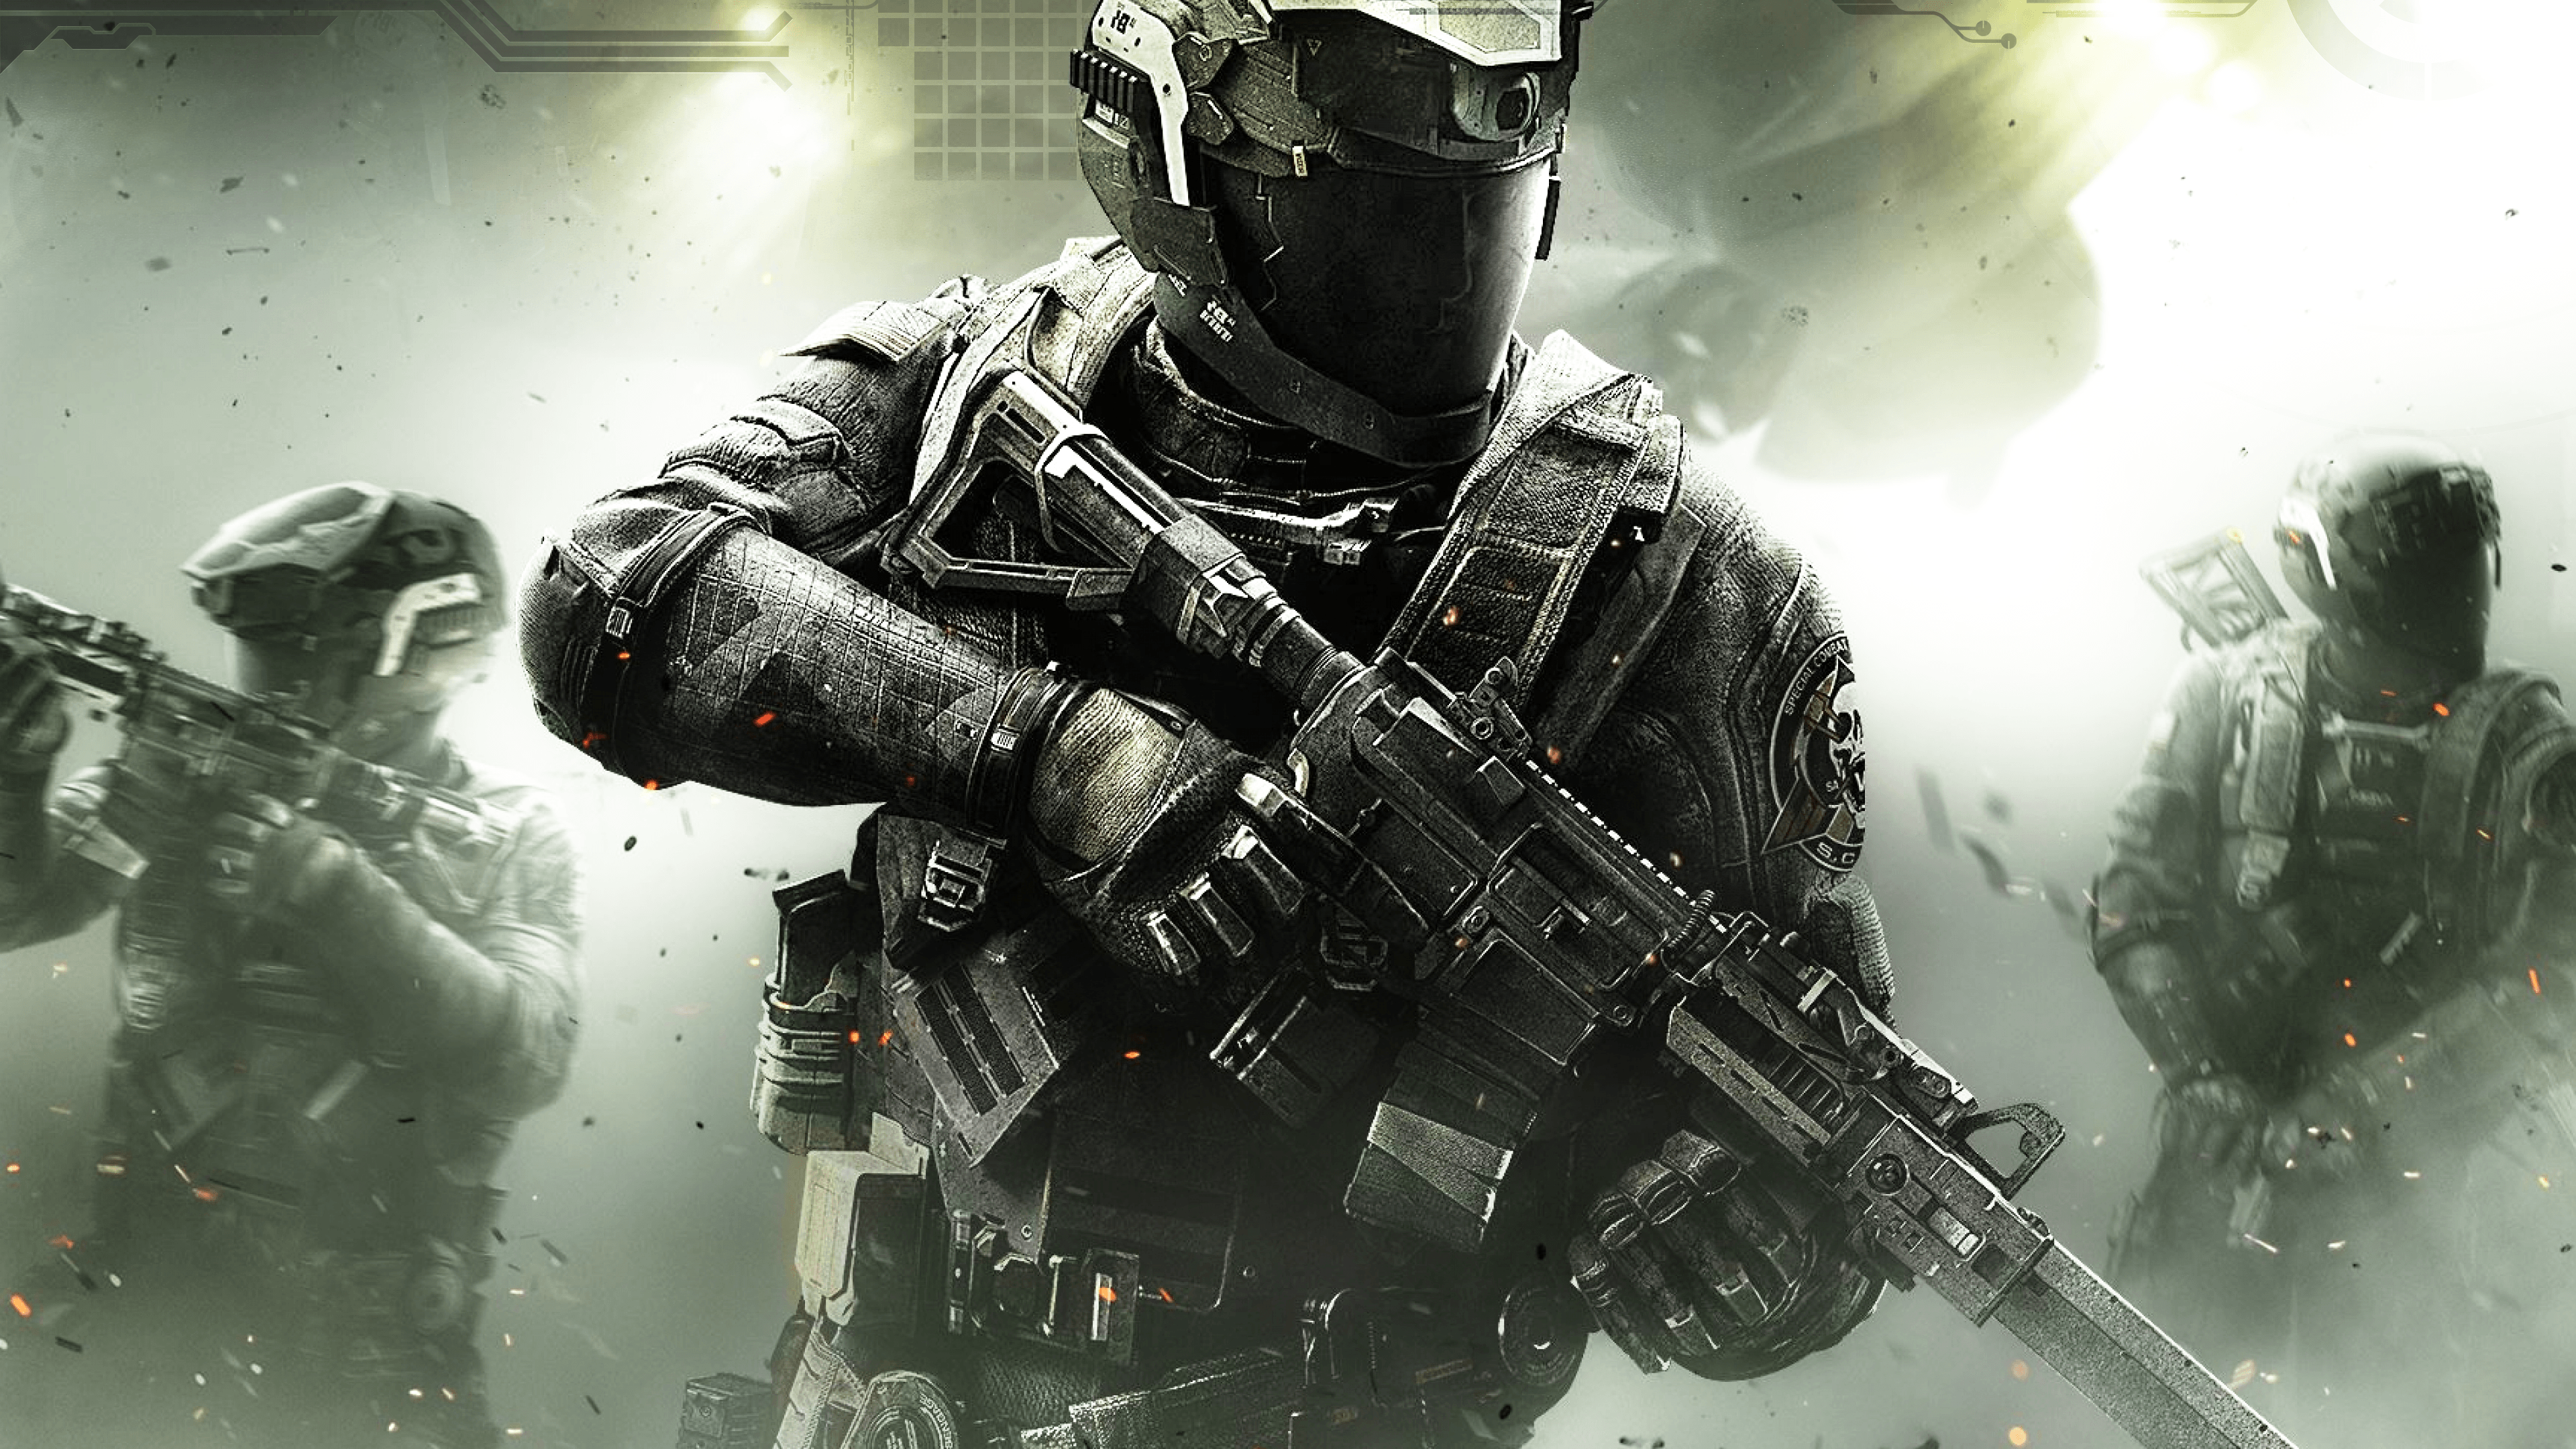 4K Call Of Duty Wallpapers